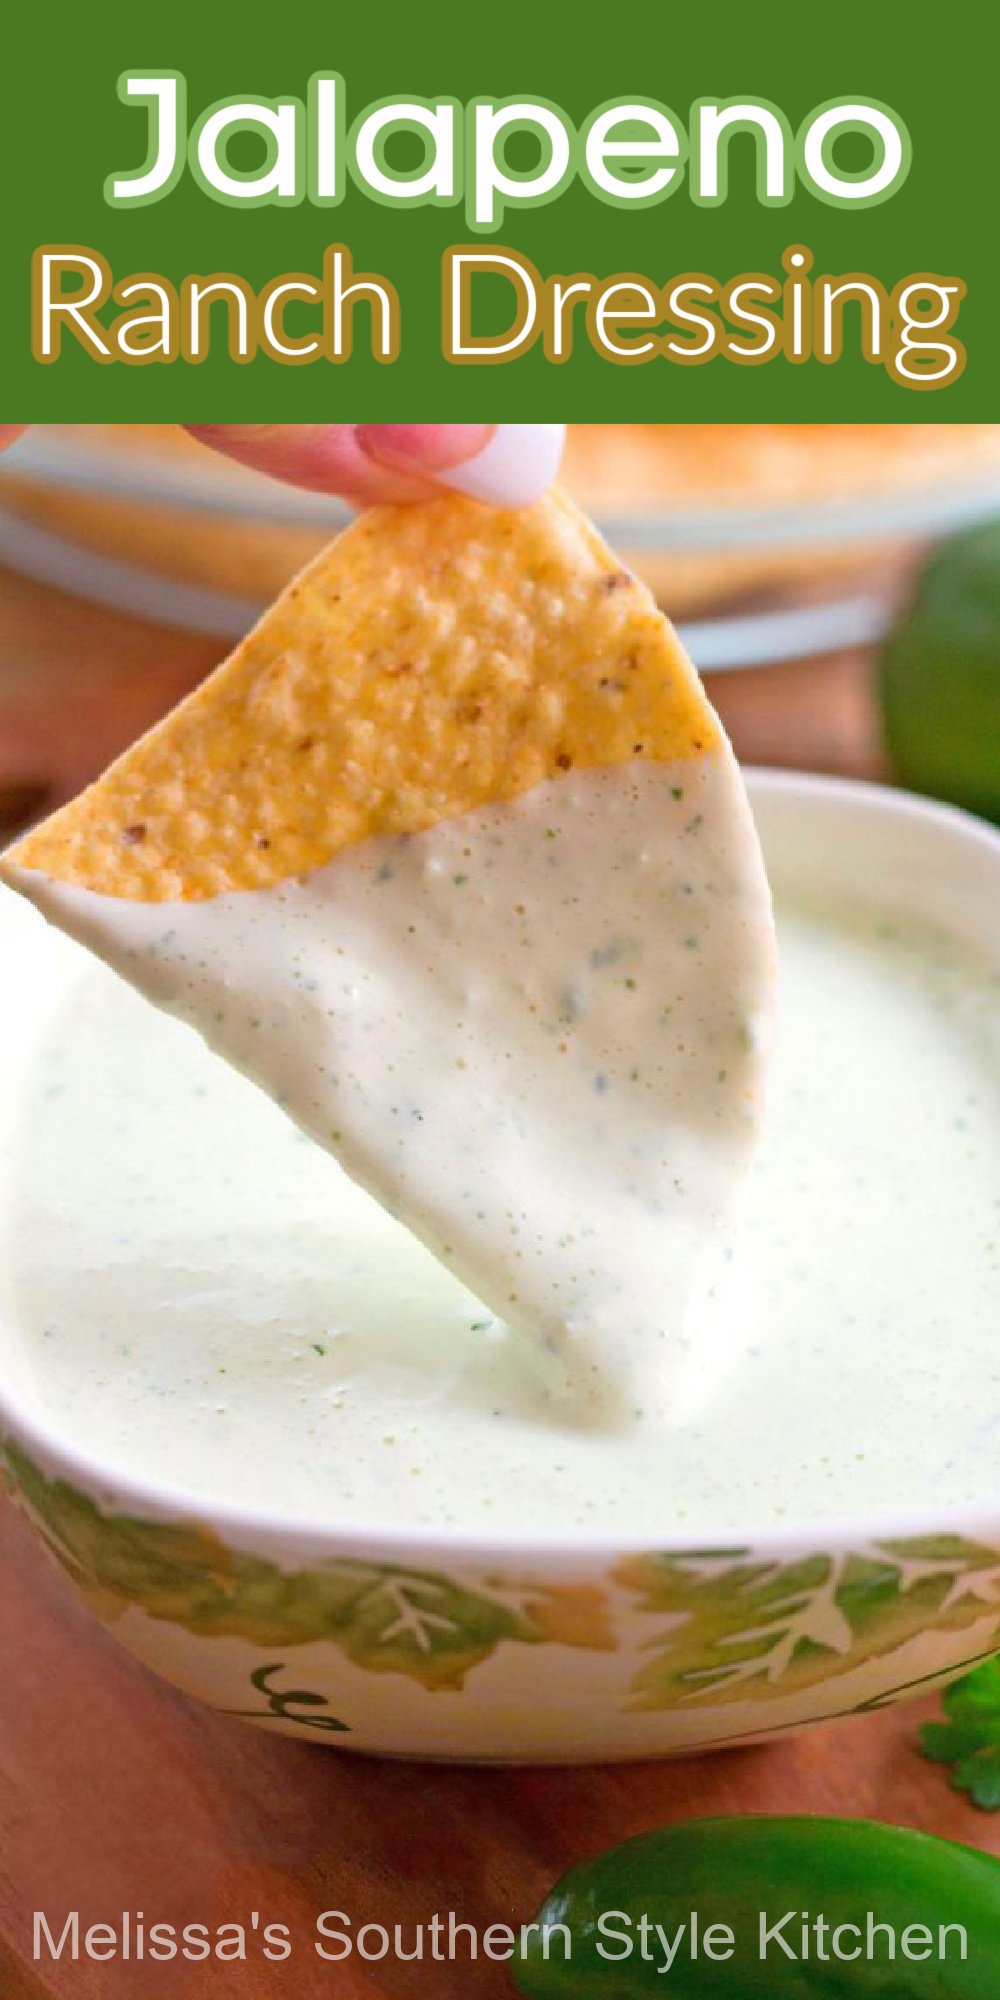 Make your own Homemade Jalapeno Ranch Dressing packed with flavor #jalapenoranchdressing #jalapeno #ranchdressing #chuyscopycat #copycatrecipes #dressing #saladdressingrecipes #southernfood #southernrecipes